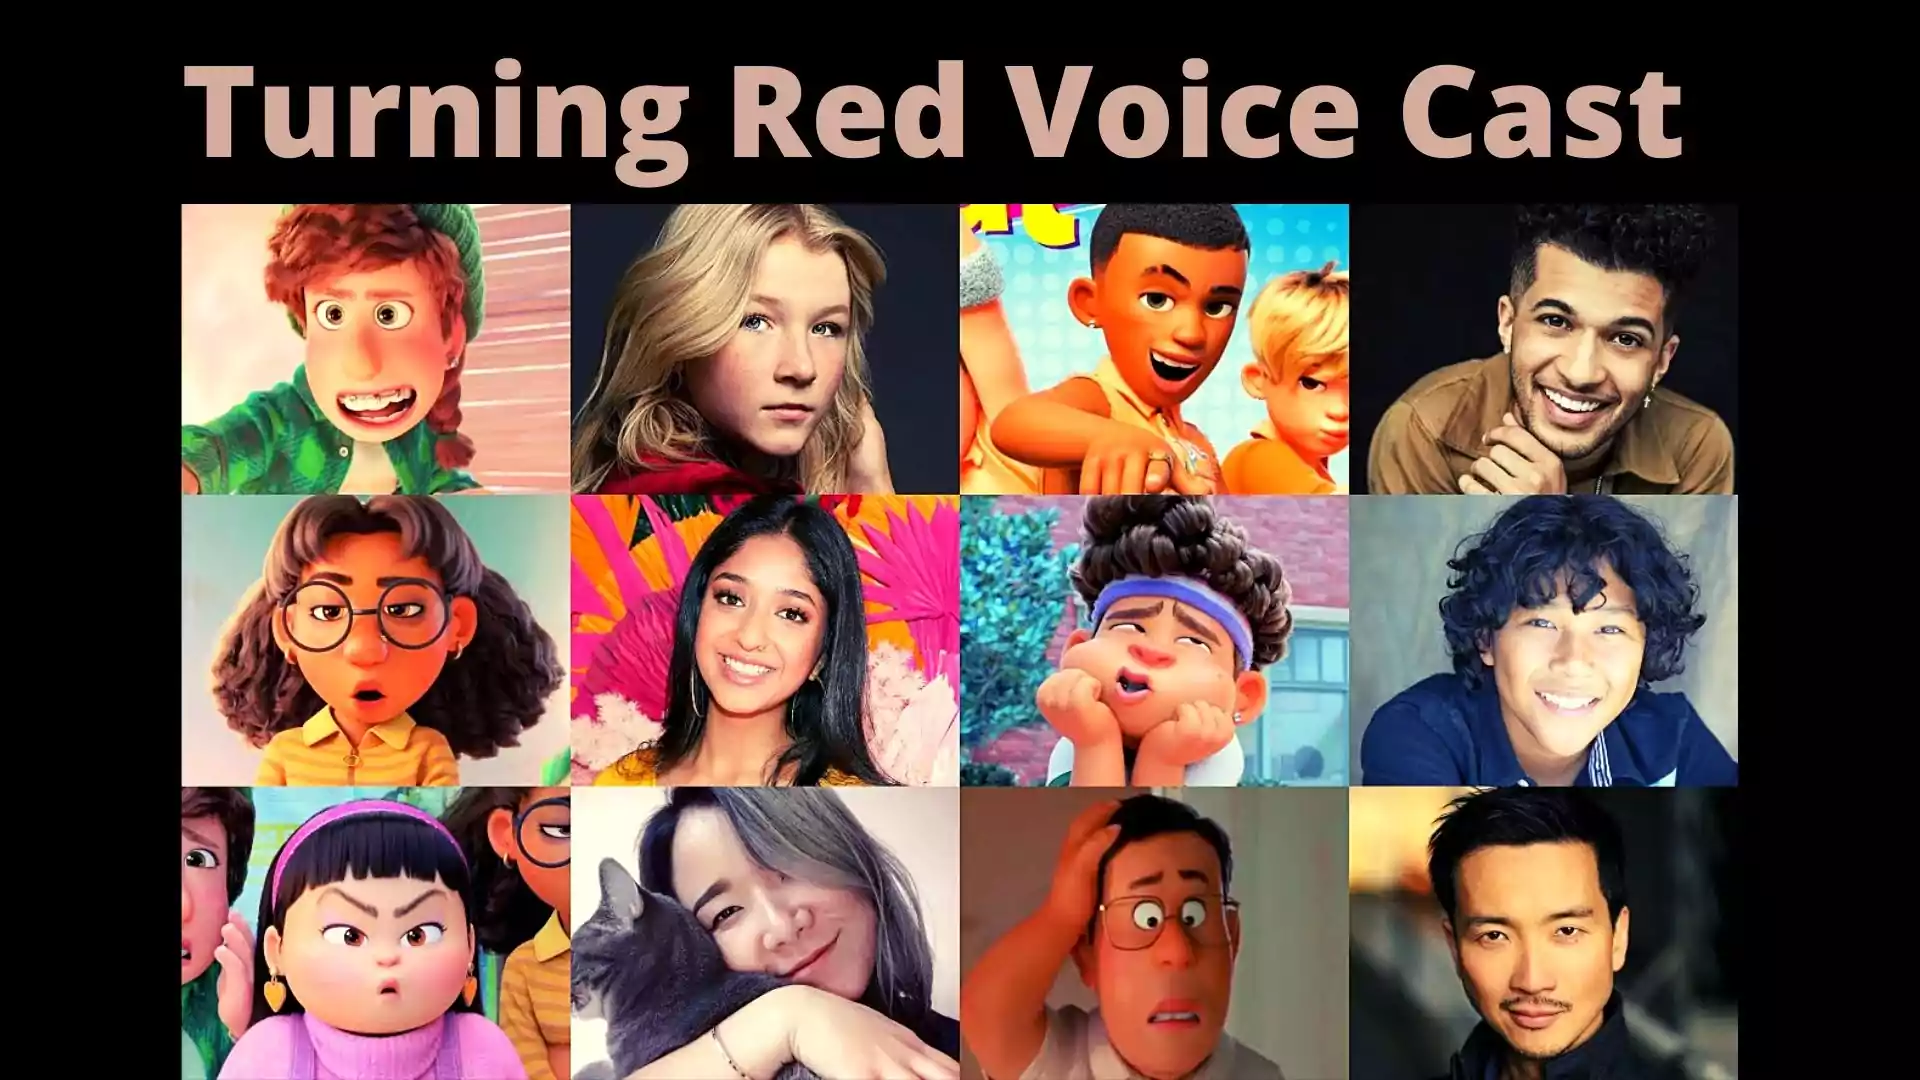 Turning Red Voice Cast wallpaper and images